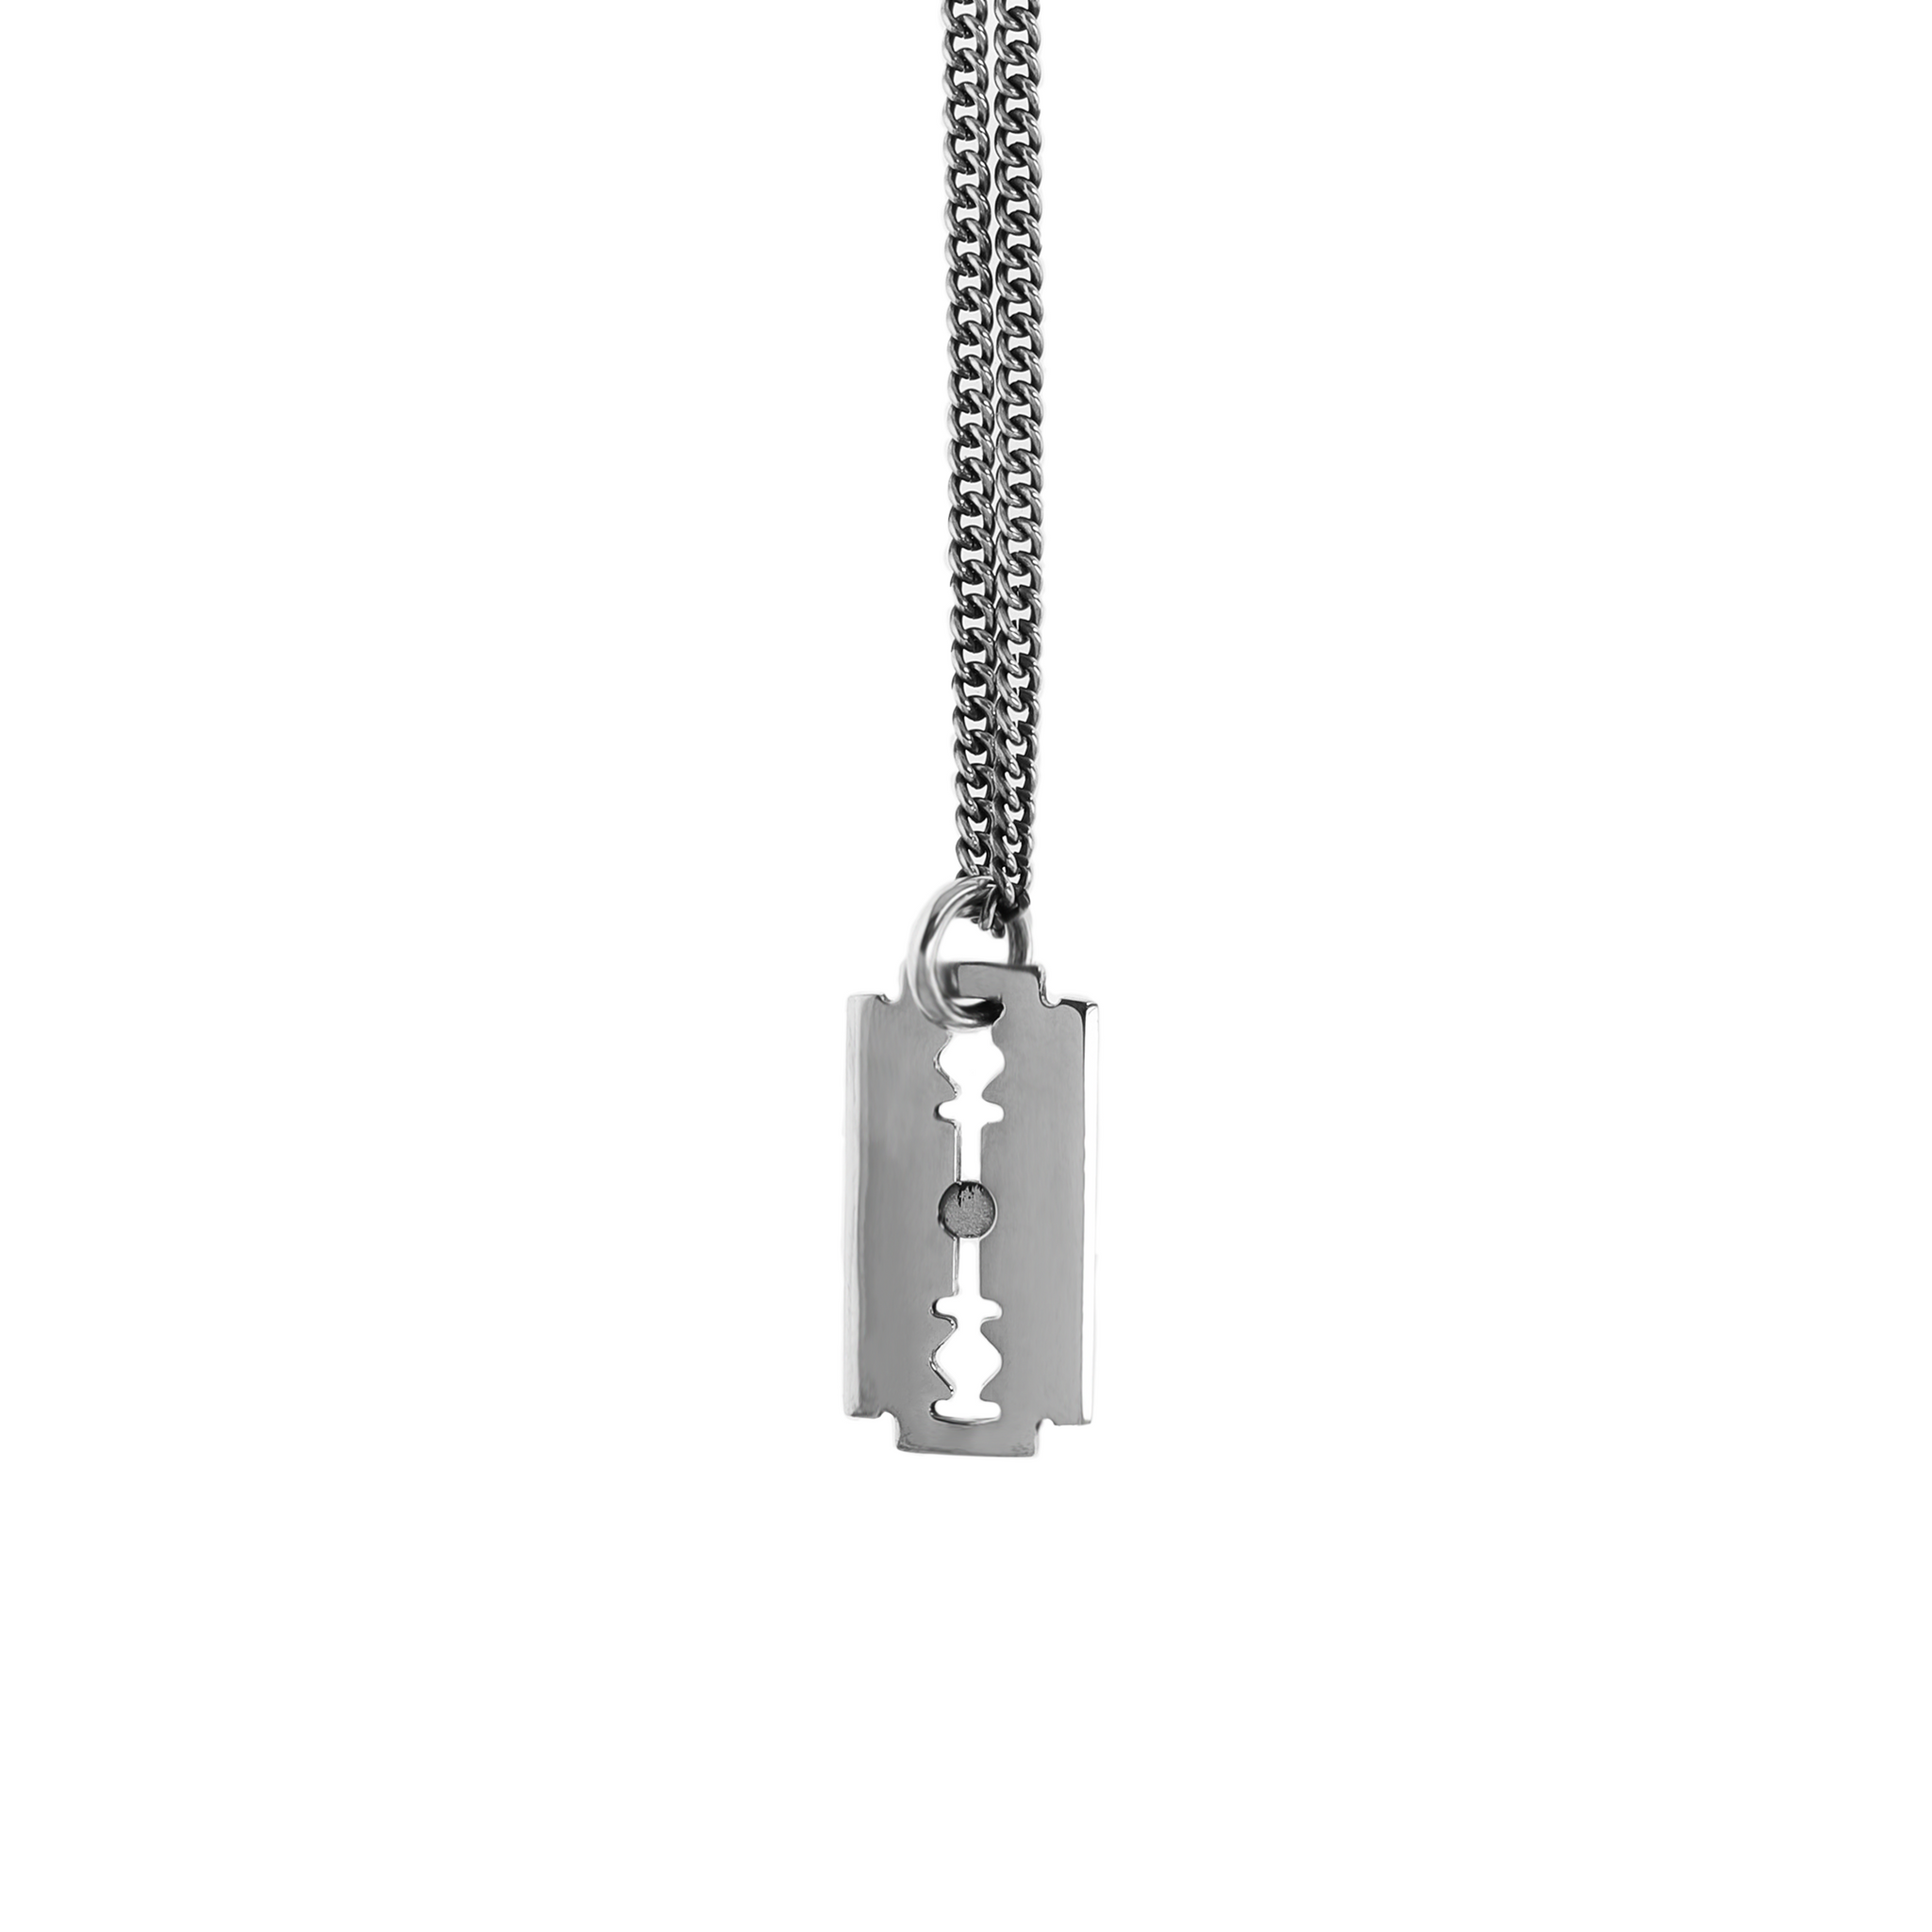 Necklace BLACK STAINLESS STEEL RAZOR BLADE and Chain